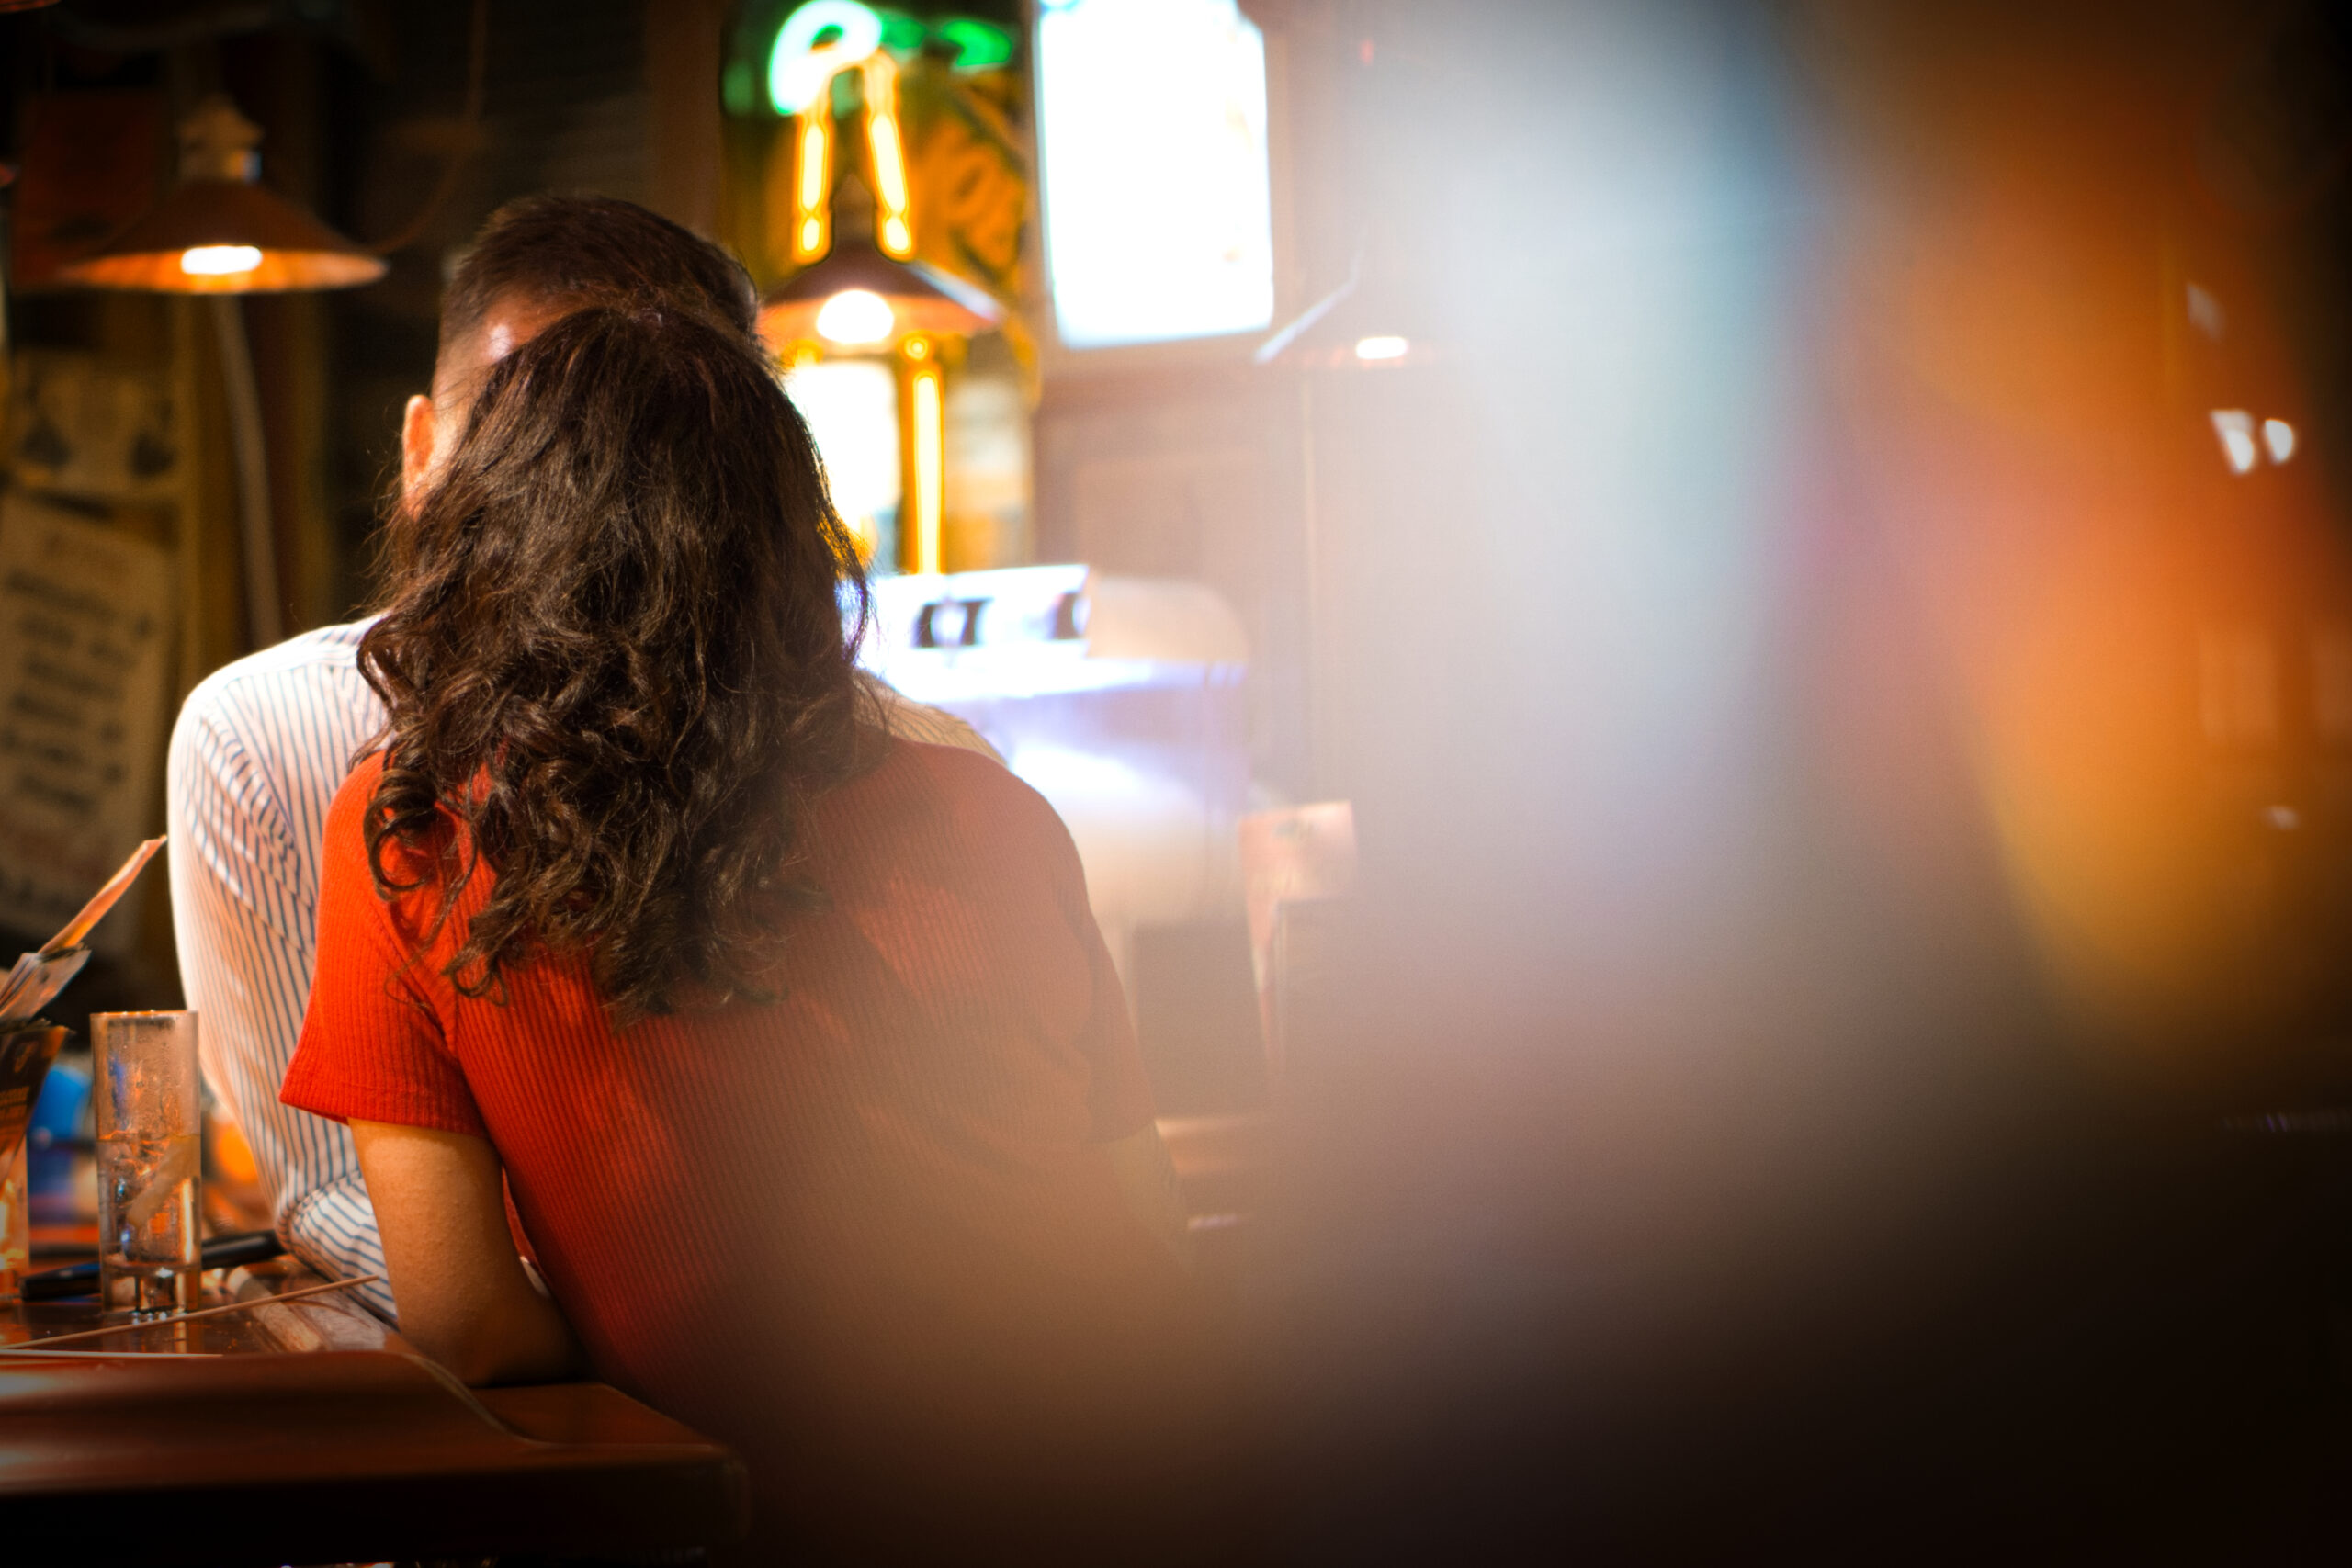 A couple talking intensively at a bar. We do not see faces, the foreground is blurry and the woman is wearing red. Street Photography at night. Photo by Bastian Peter.